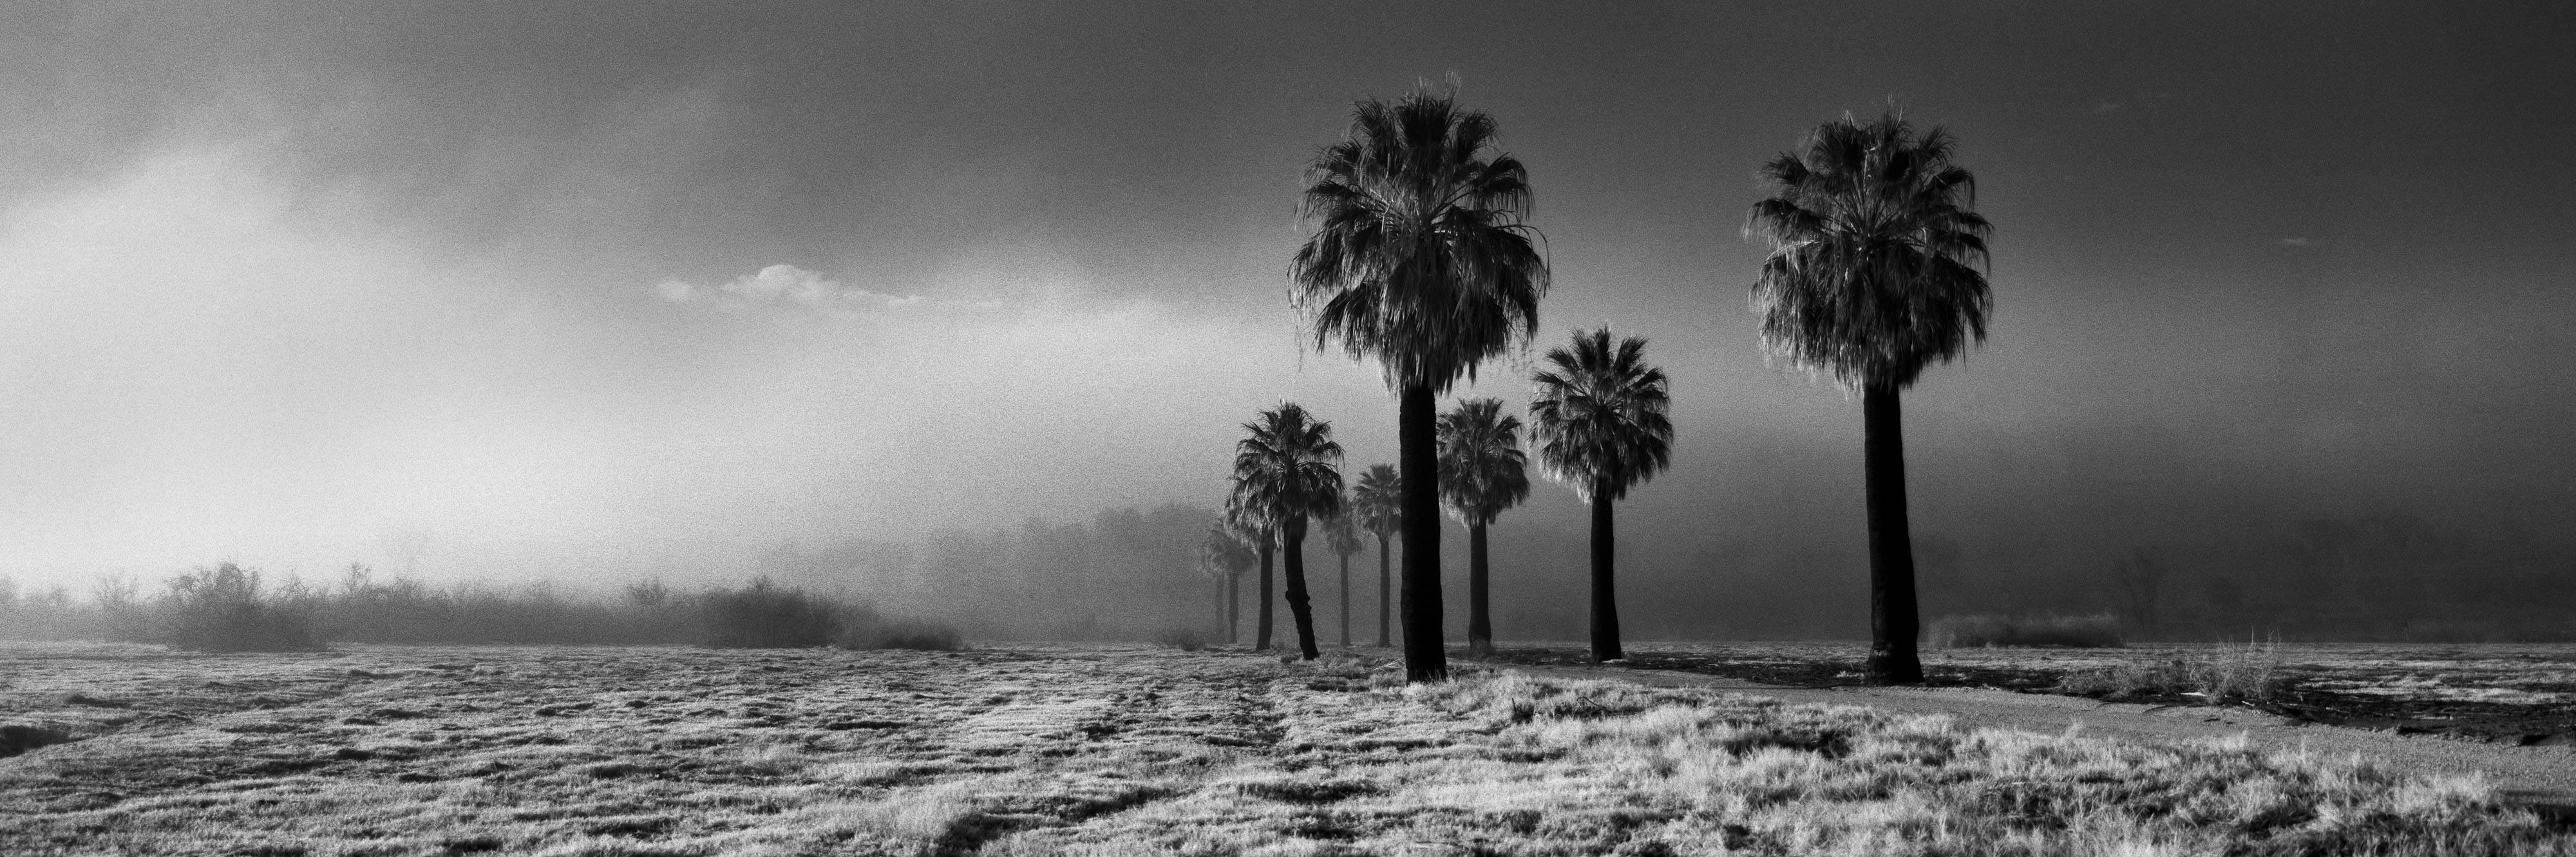 Cody S. Brothers Black and White Photograph - Landscape Photography Panoramic Series: 'Warm Springs Palm Trees'